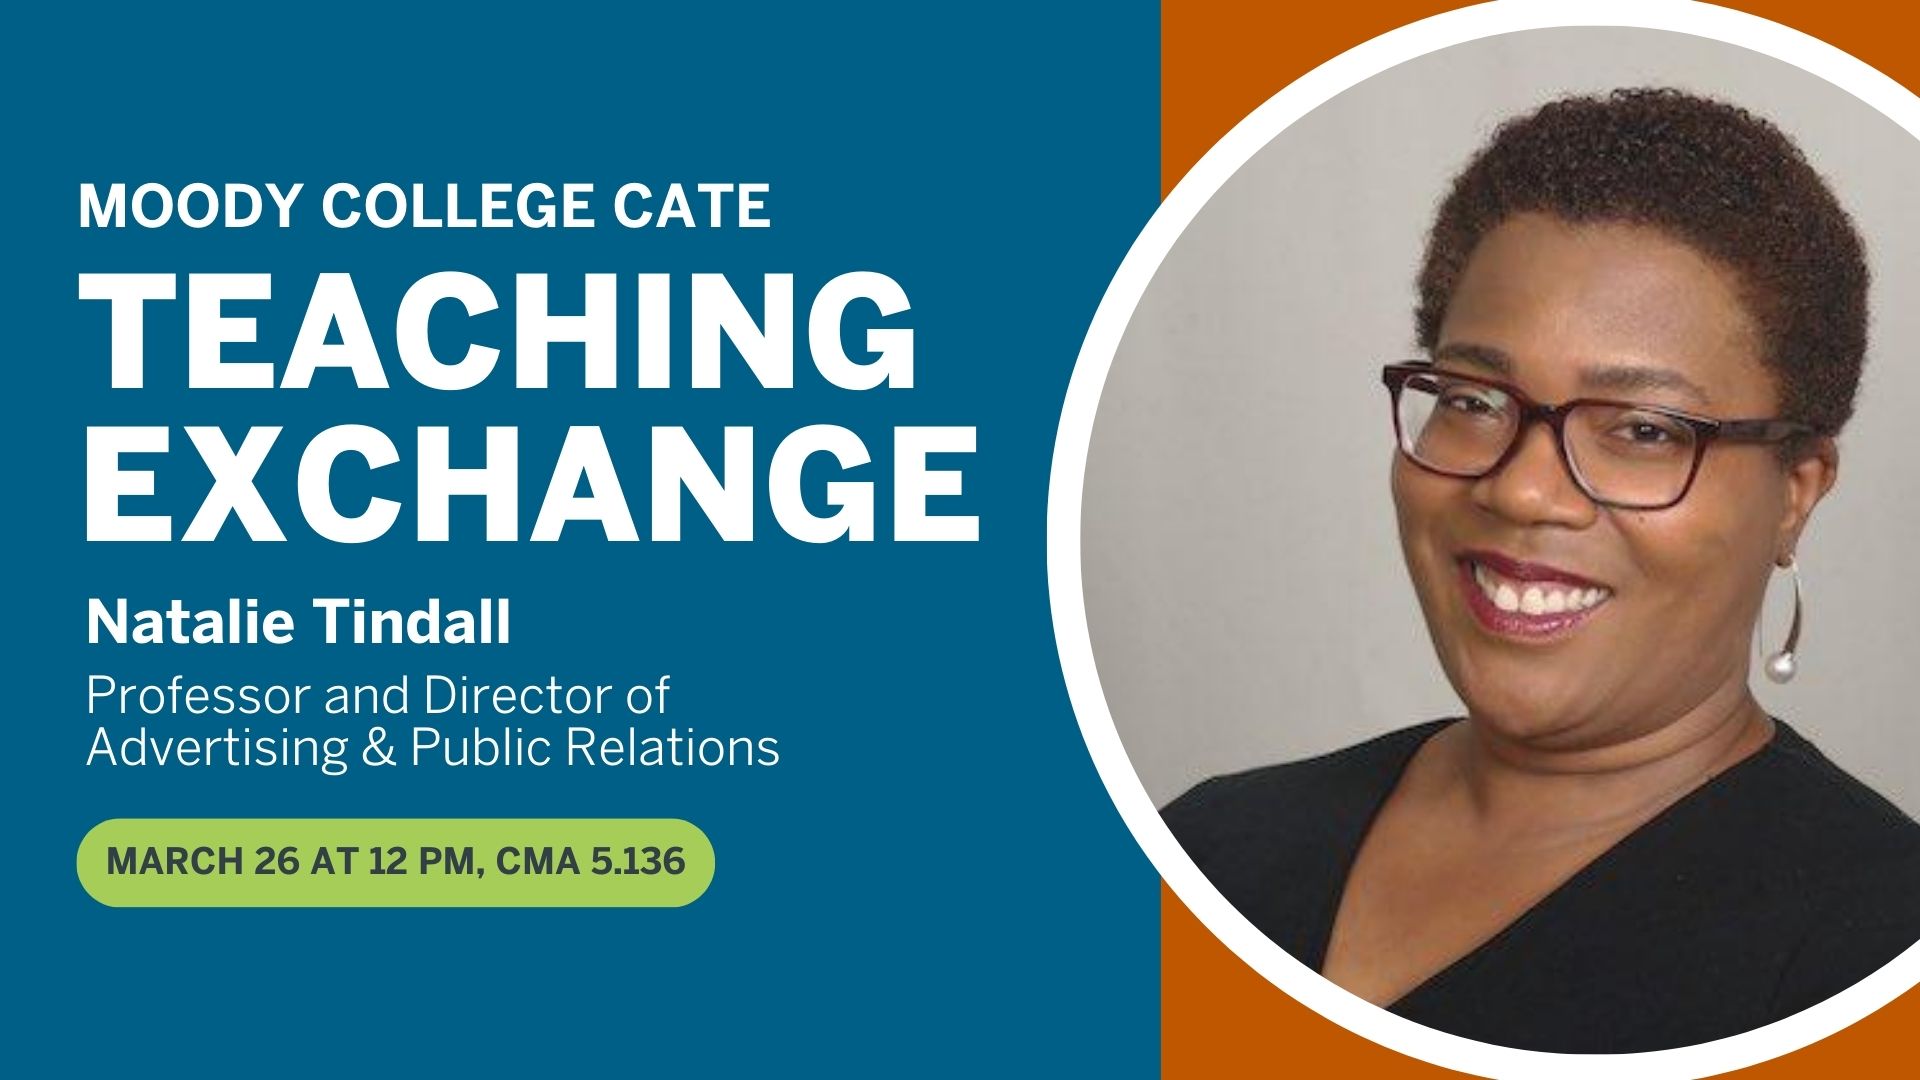 CATE Teaching Exchange - Natalie Tindall. March 26 at 12-12:45 p.m. in CMA 5.136.